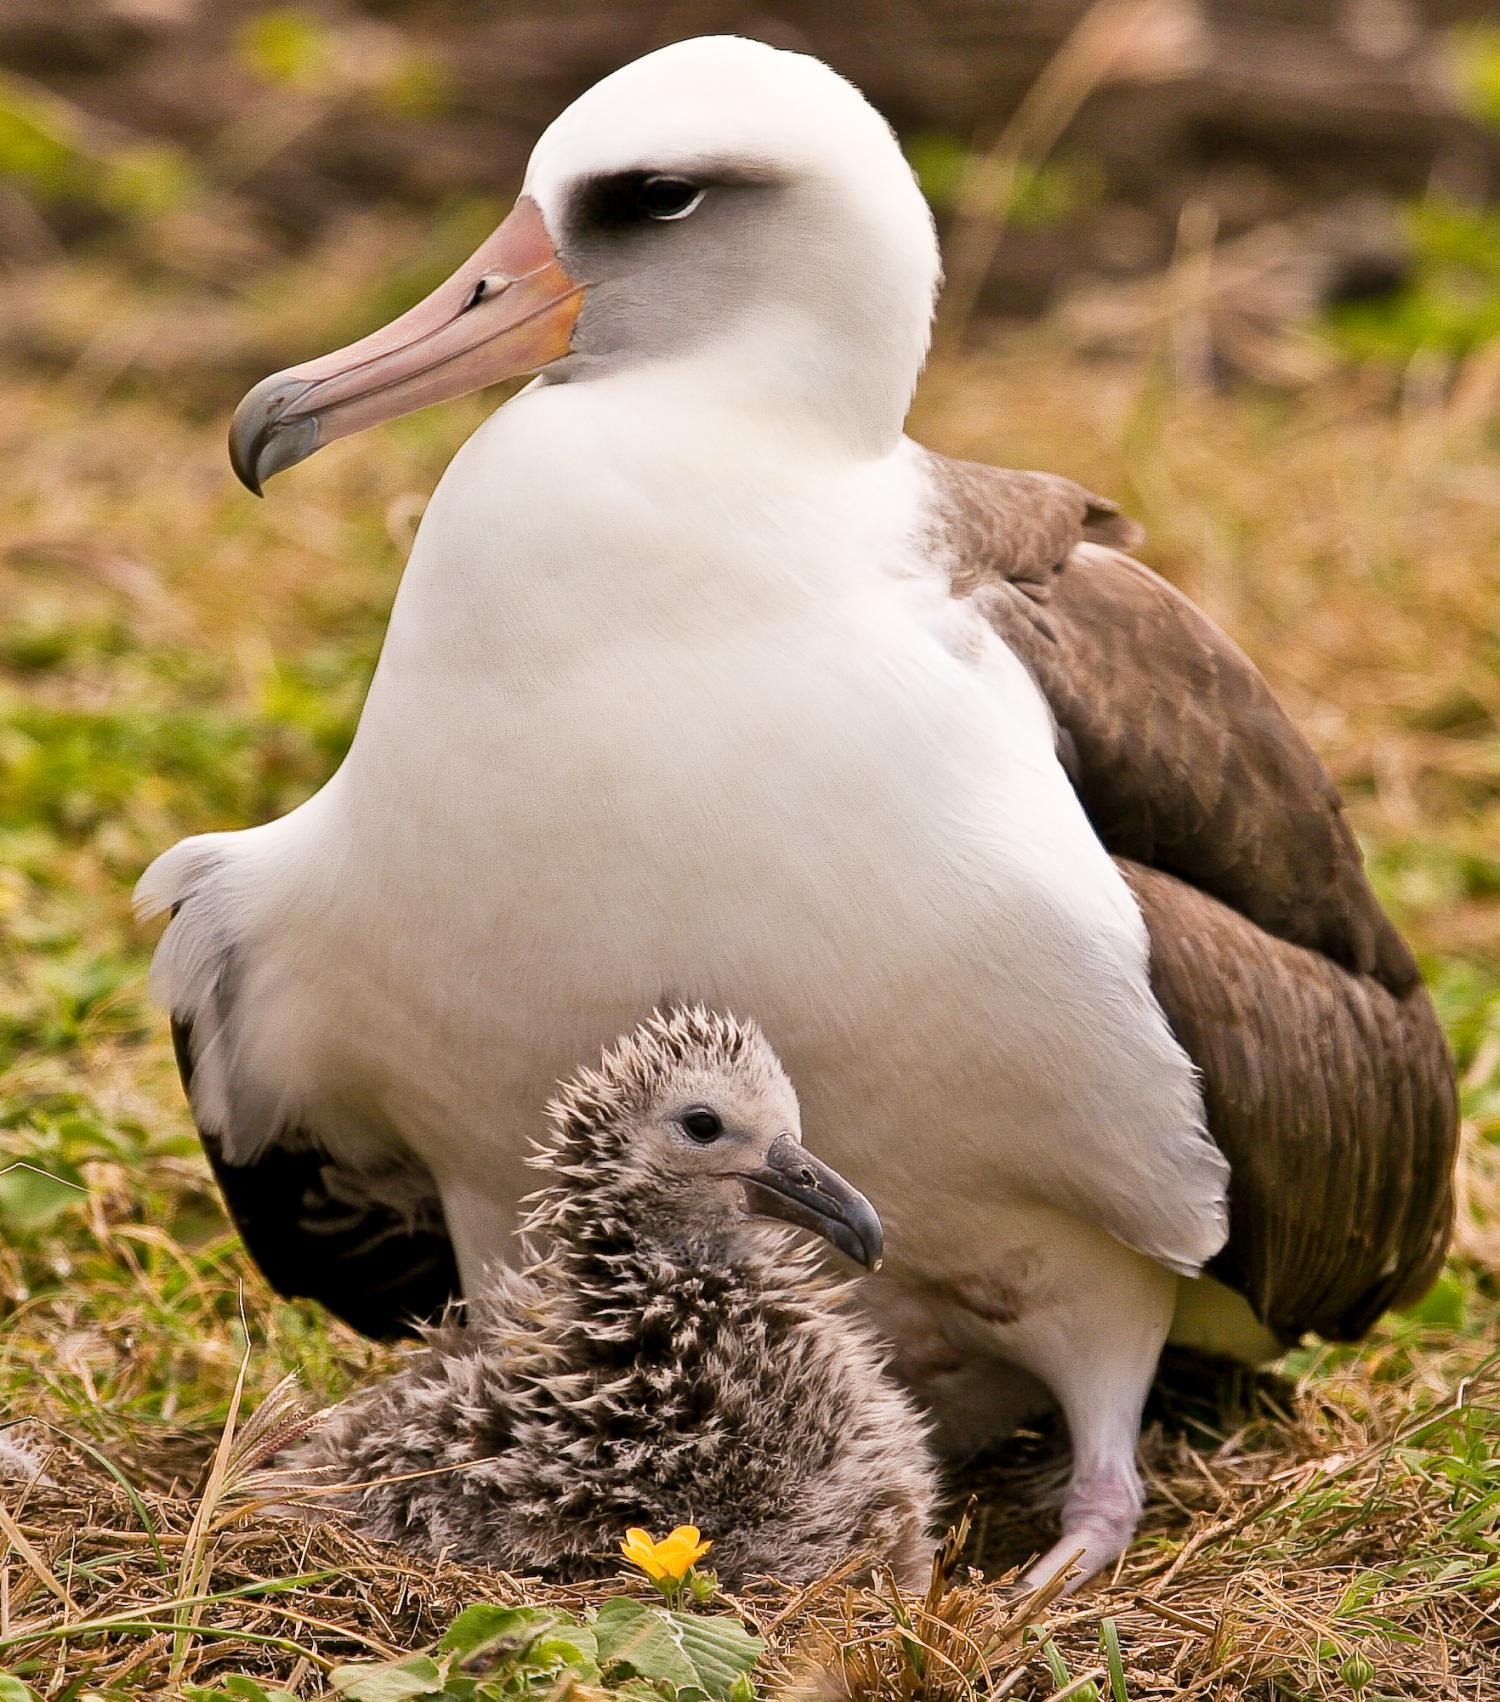 A rare window on the lives of young albatrosses